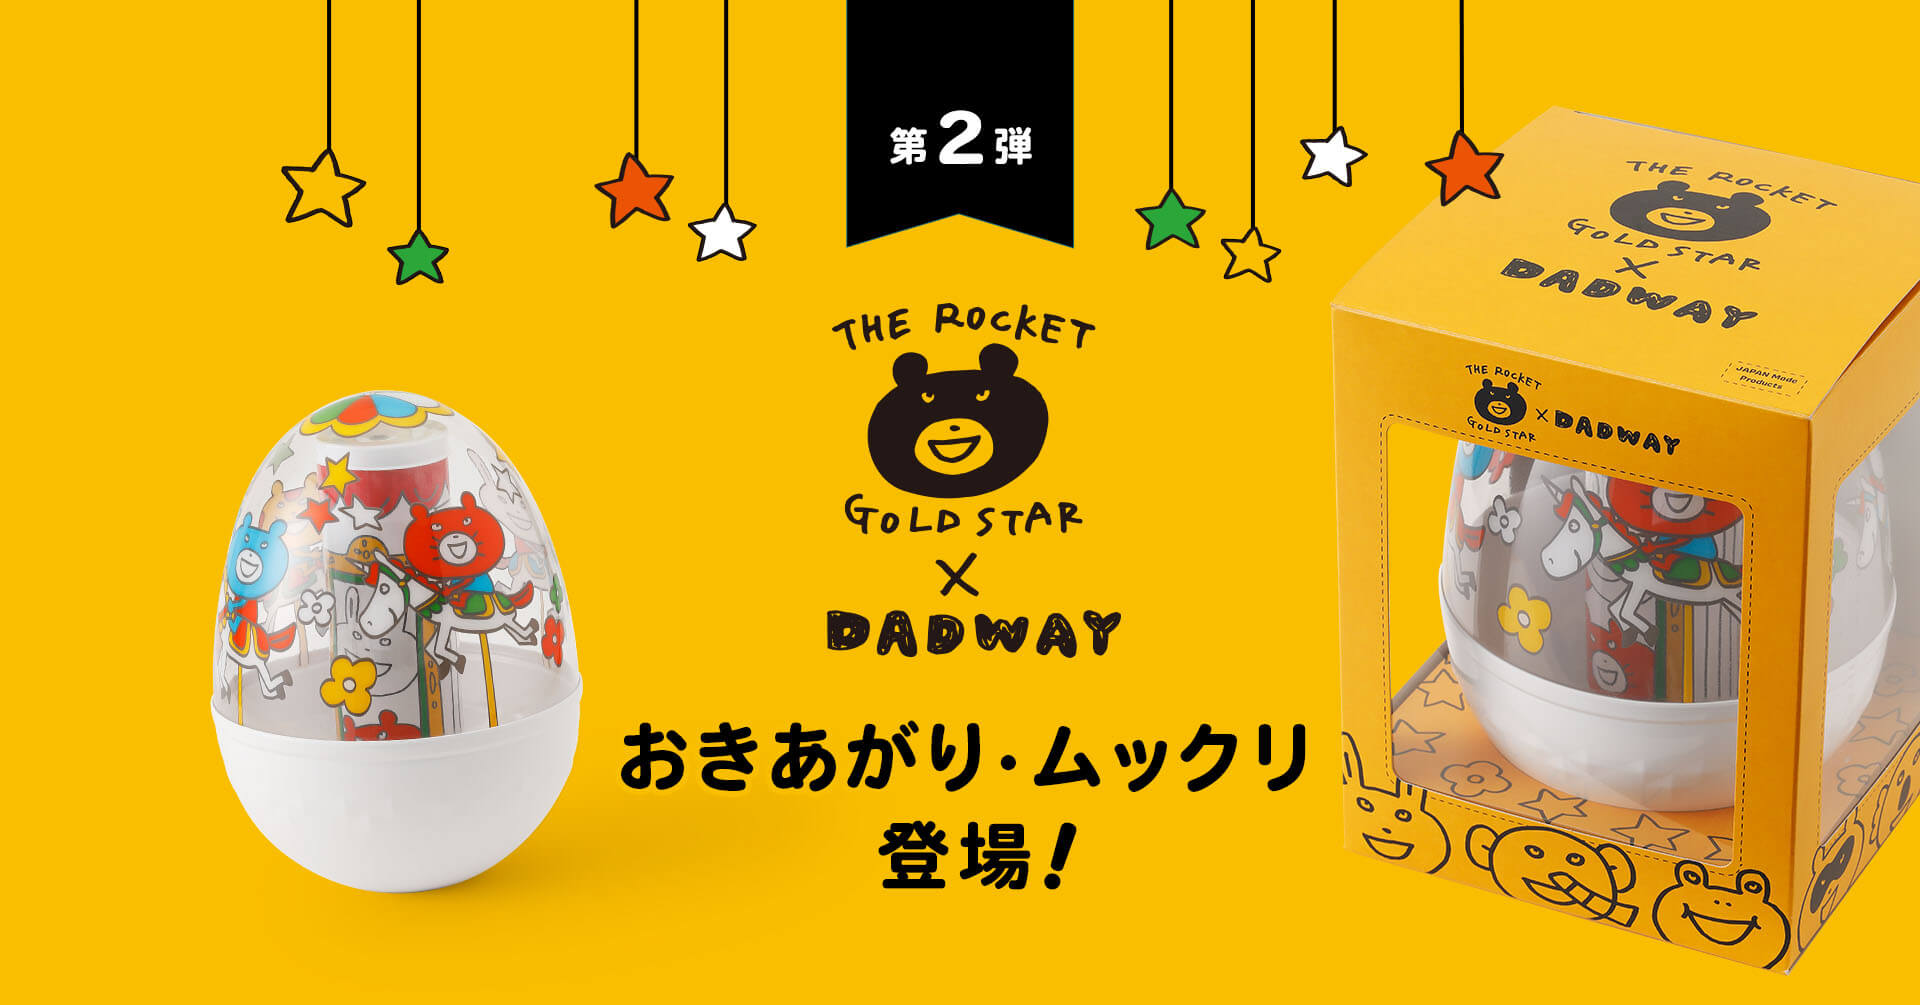 THE ROCKET GOLD STAR×DADWAY第二弾、初のおもちゃが新登場